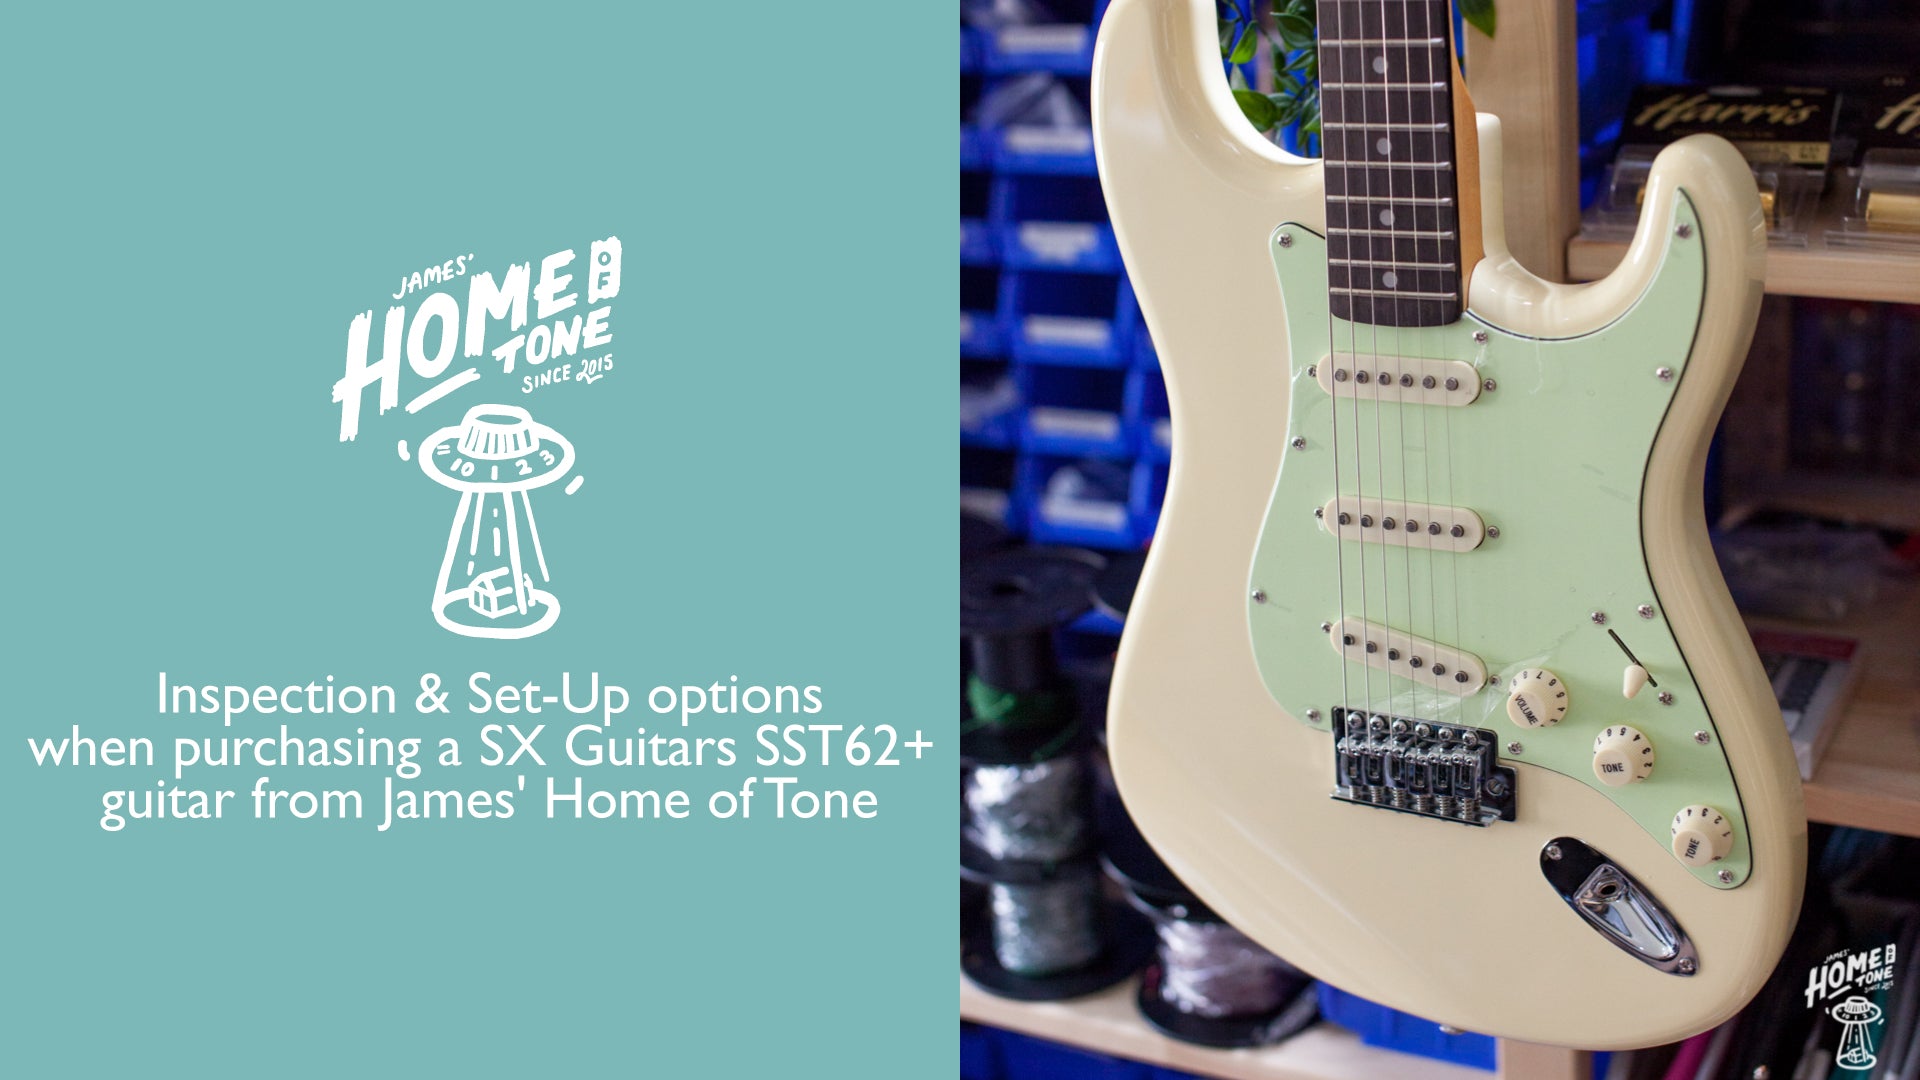 Inspection & Set-Up options when purchasing a SX Guitars 'SST62+' guitar from James' Home of Tone